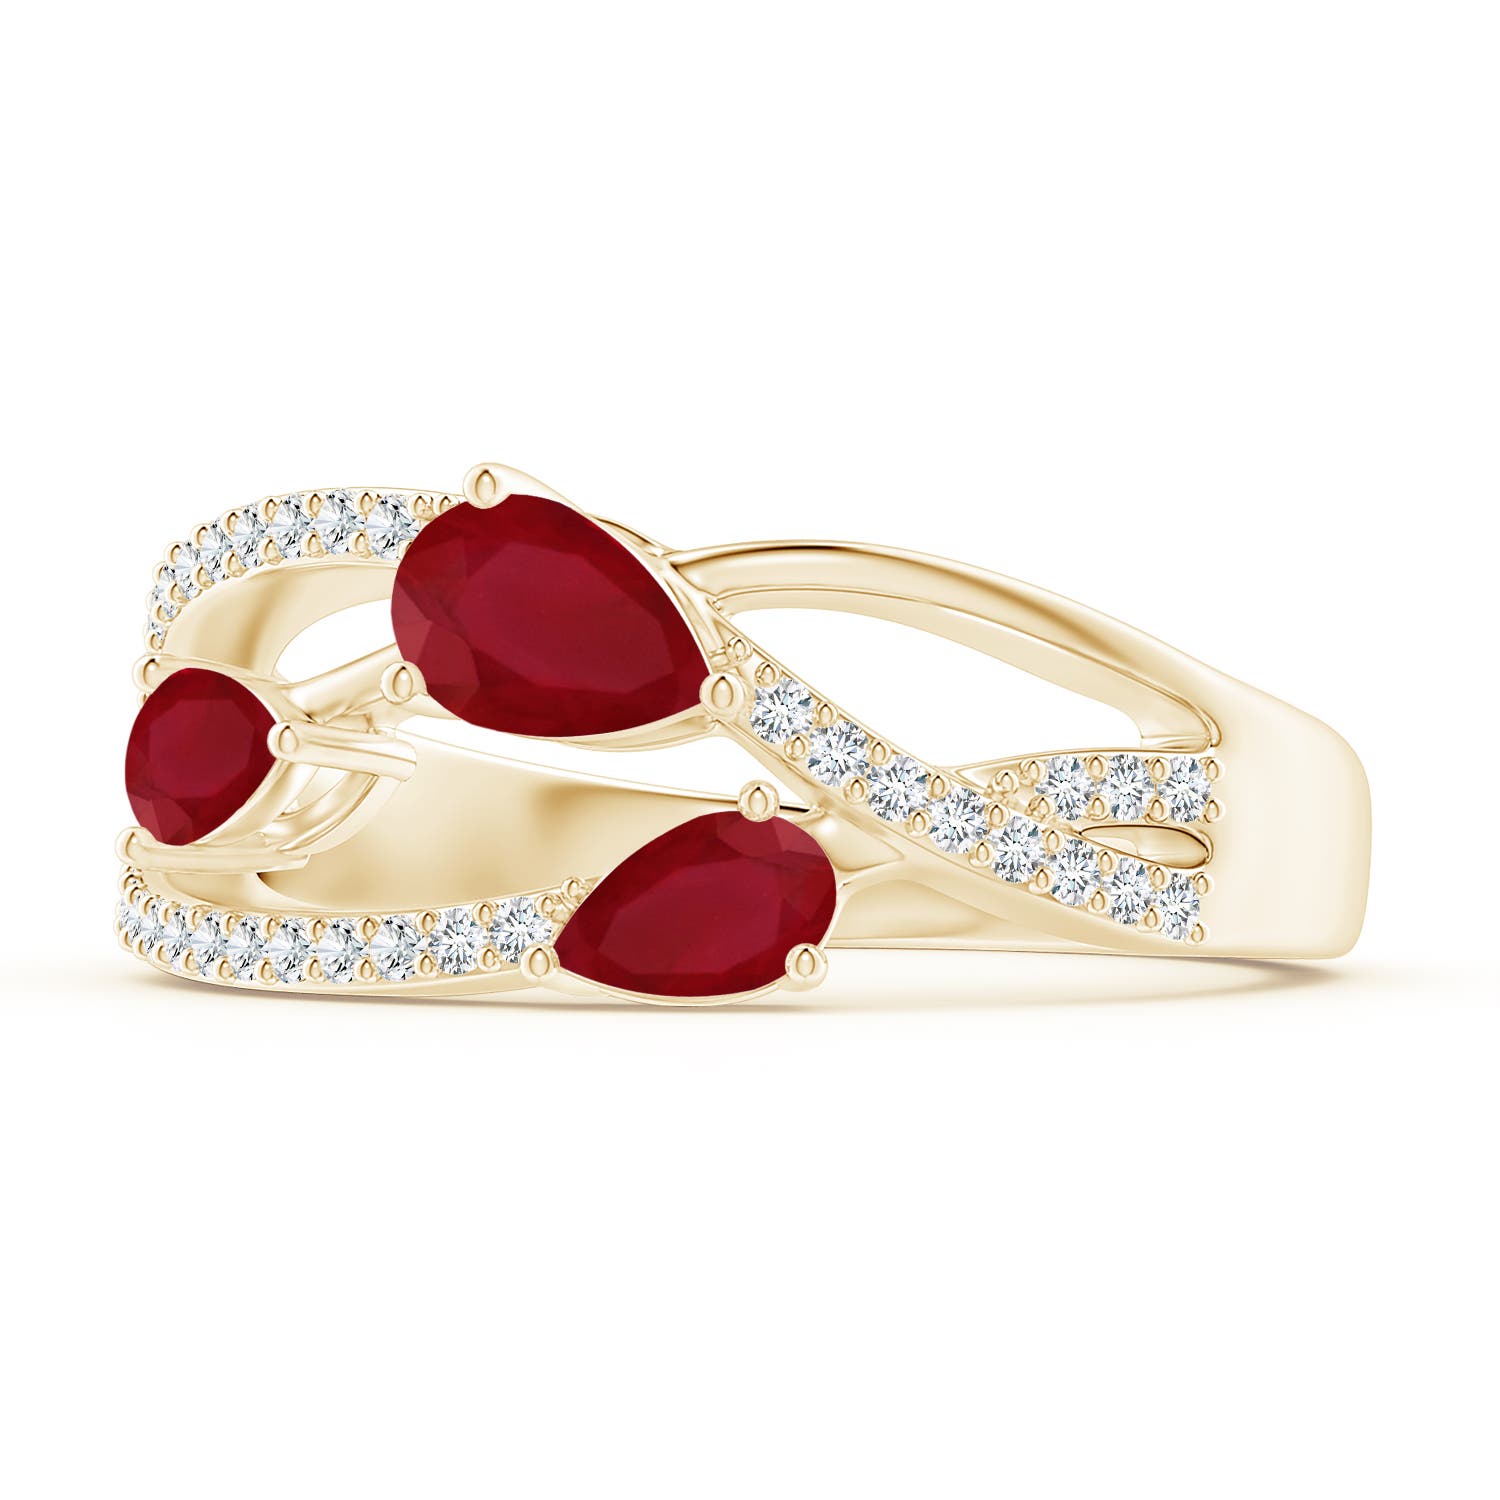 AA - Ruby / 1.03 CT / 14 KT Yellow Gold